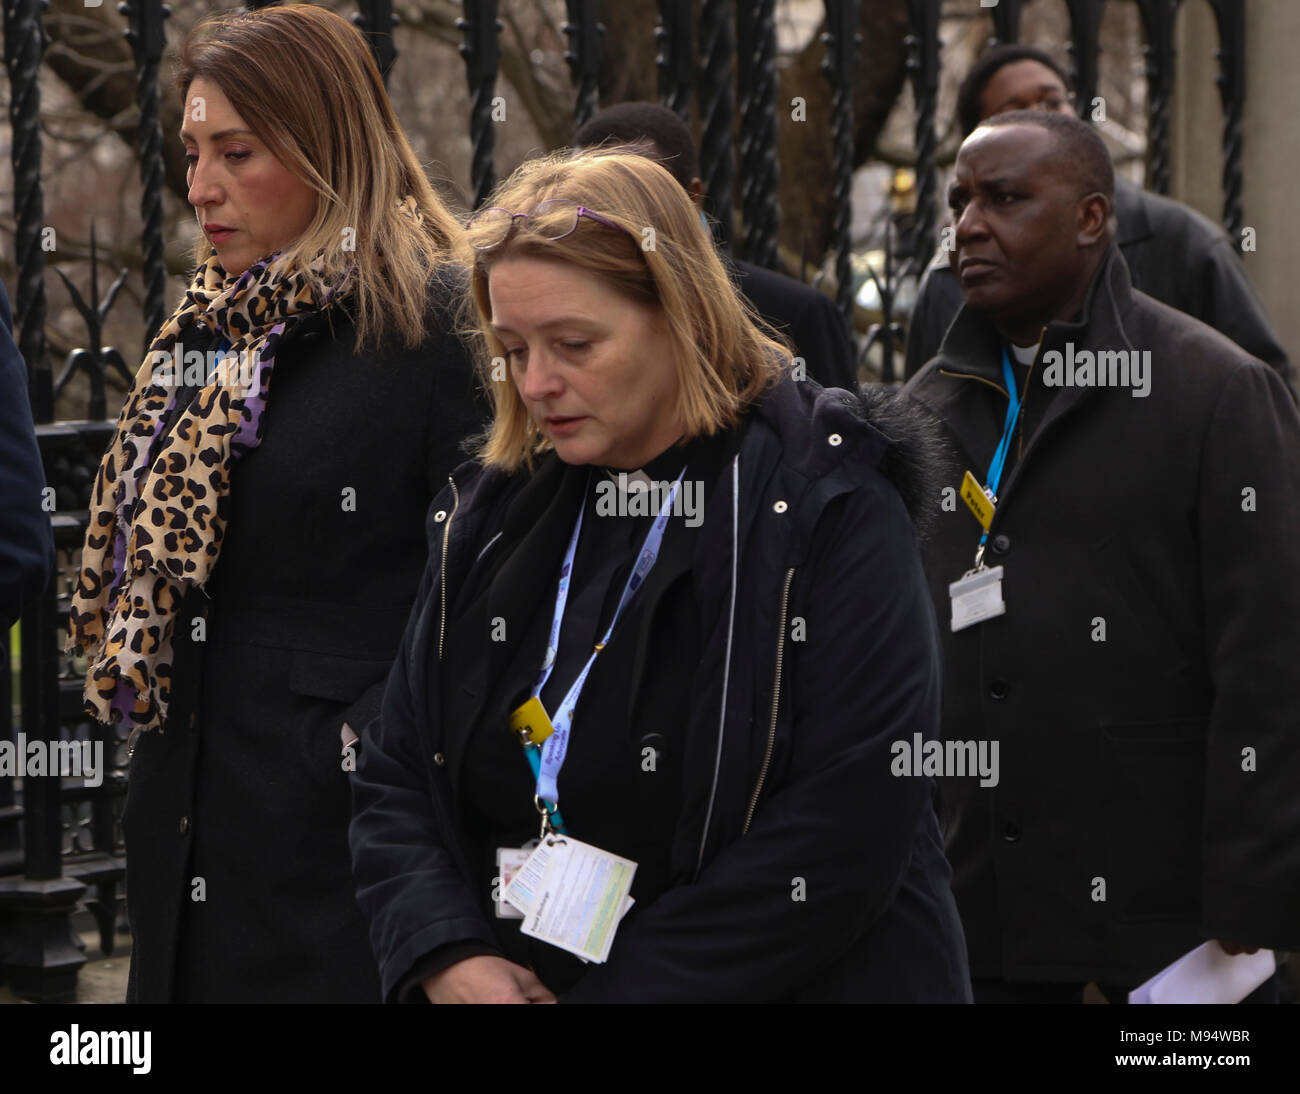 Westminster Bridge, London, United Kingdom. 22nd March 2018. London united: one year on from the terror attacks in Westminster - Memorial ceremony commemorating the first anniversary of the Westminster Terror attacks and the death of Keith Palmer and all others killed in the terror attack on the 22 March 2017. Credit: Aron Robert Williams/ Alamy Live News Stock Photo